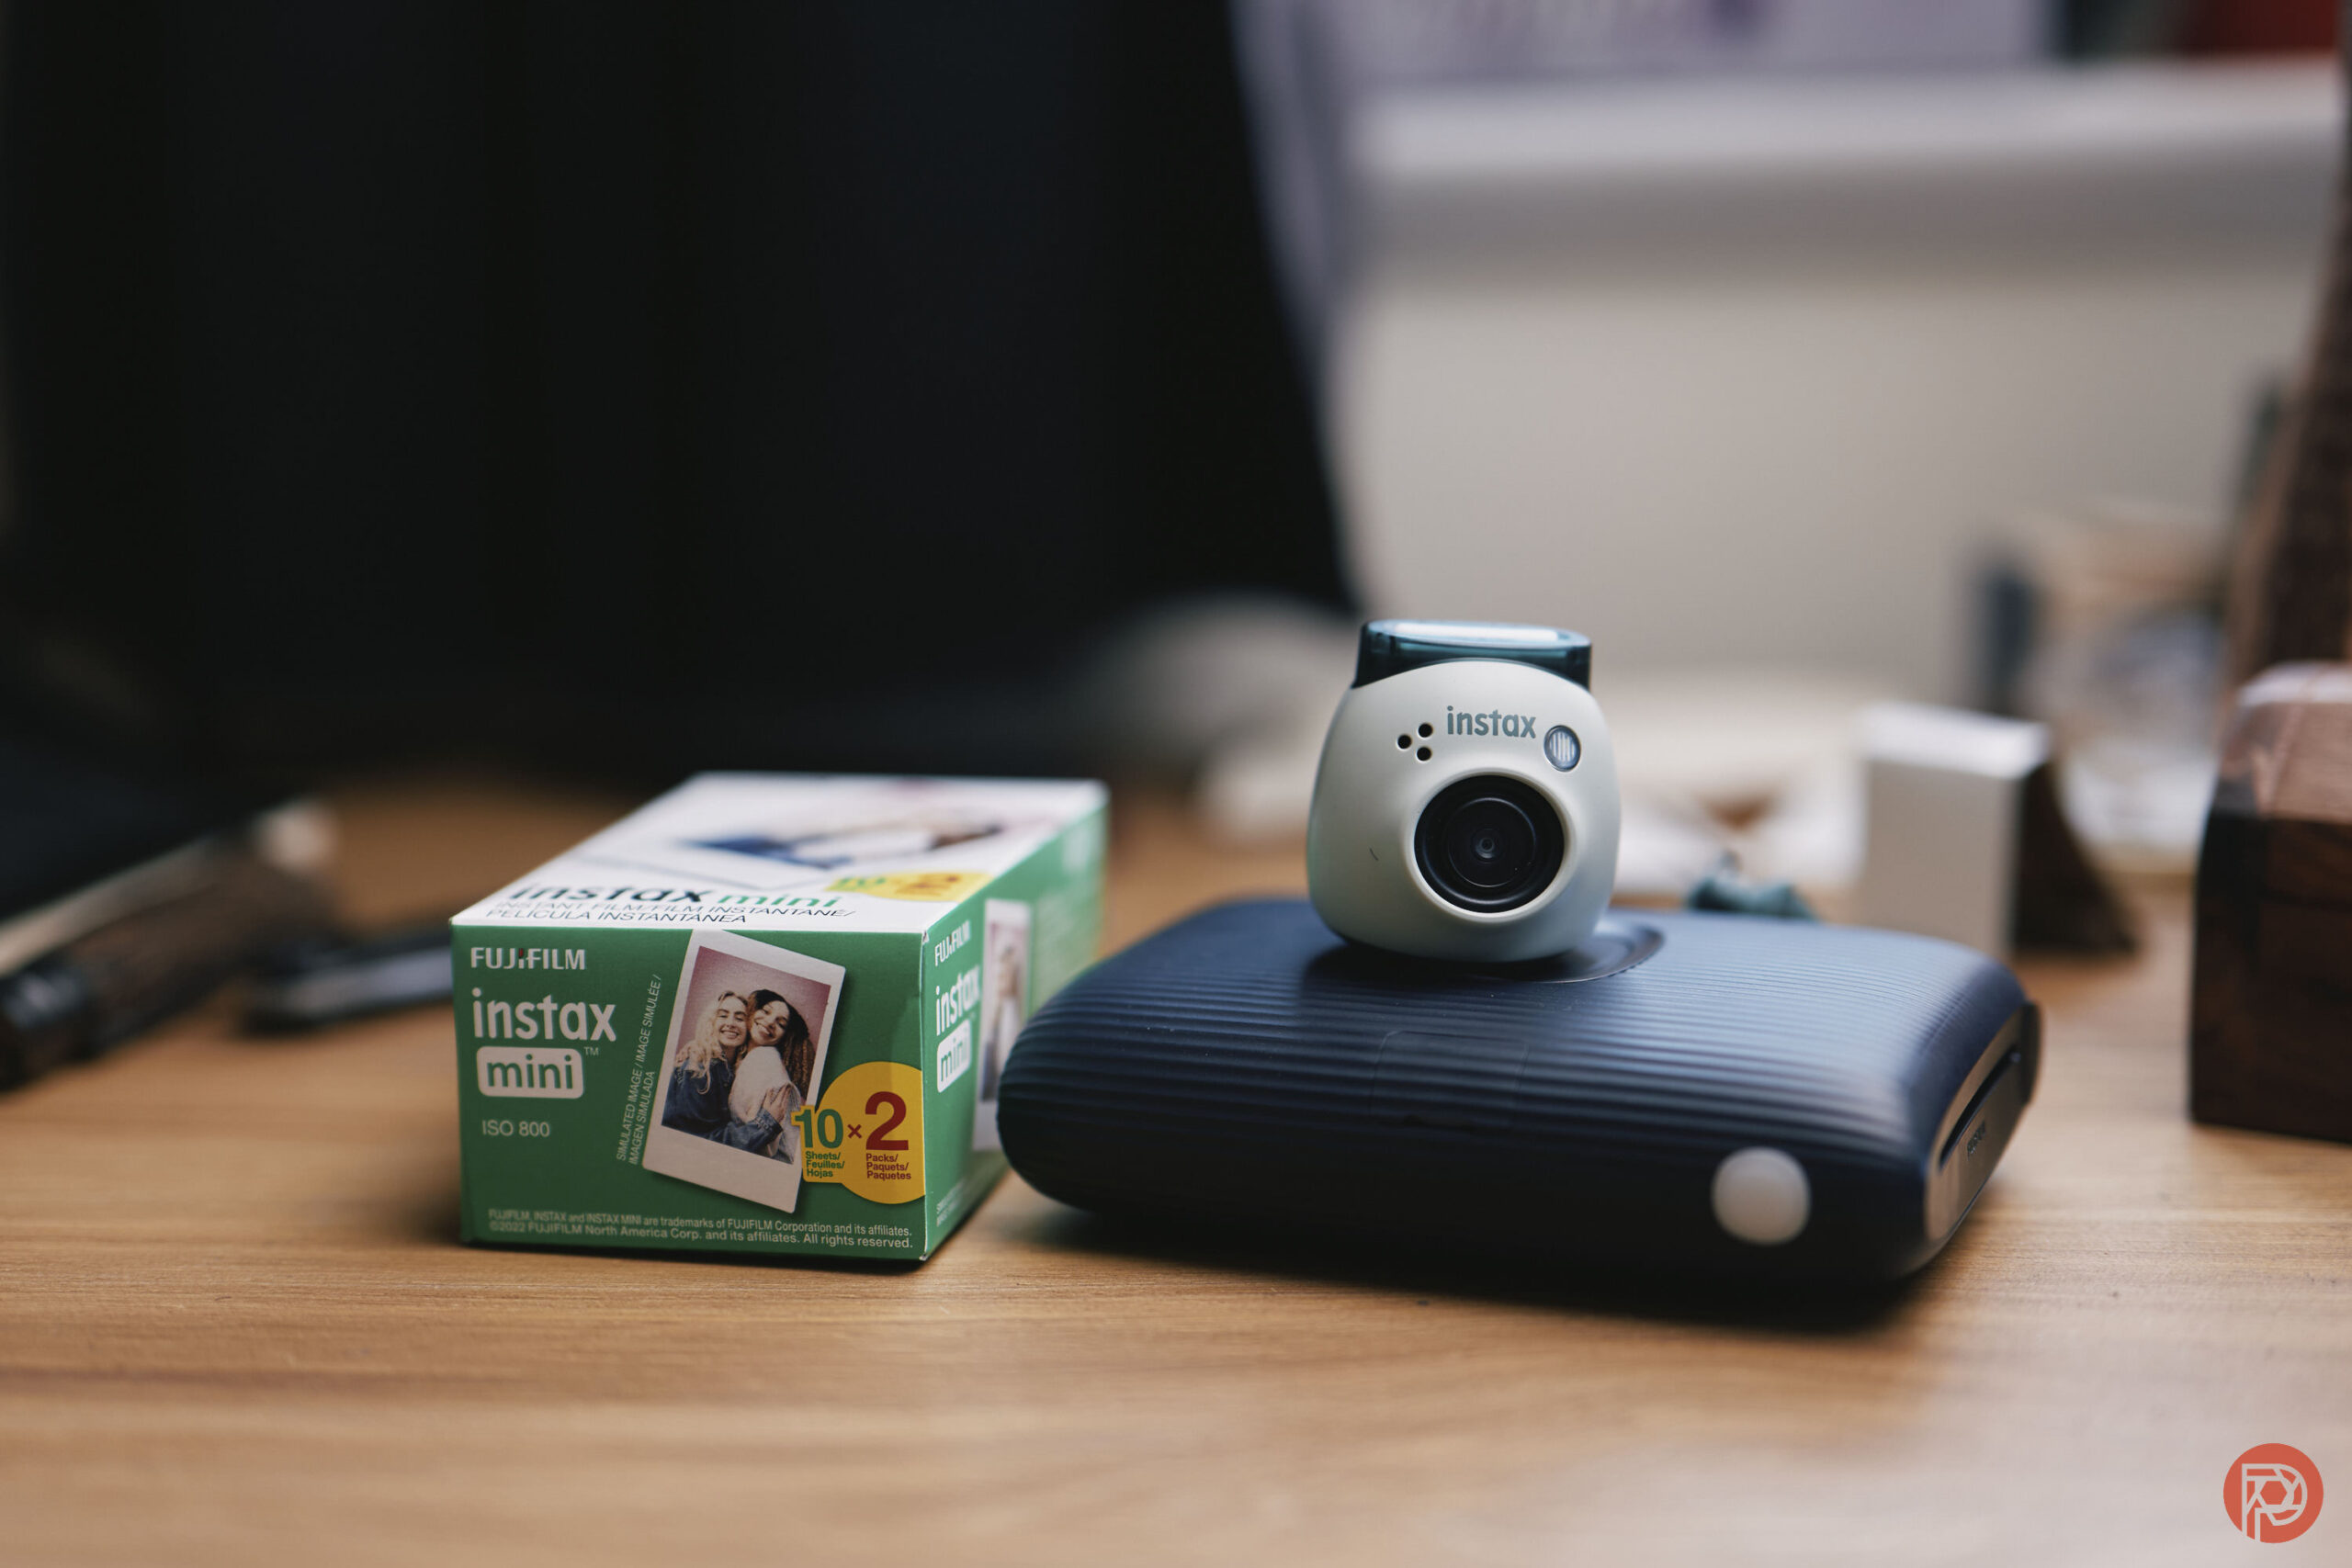 Fujifilm Instax Pal Review: The Cutest Camera We've Tested